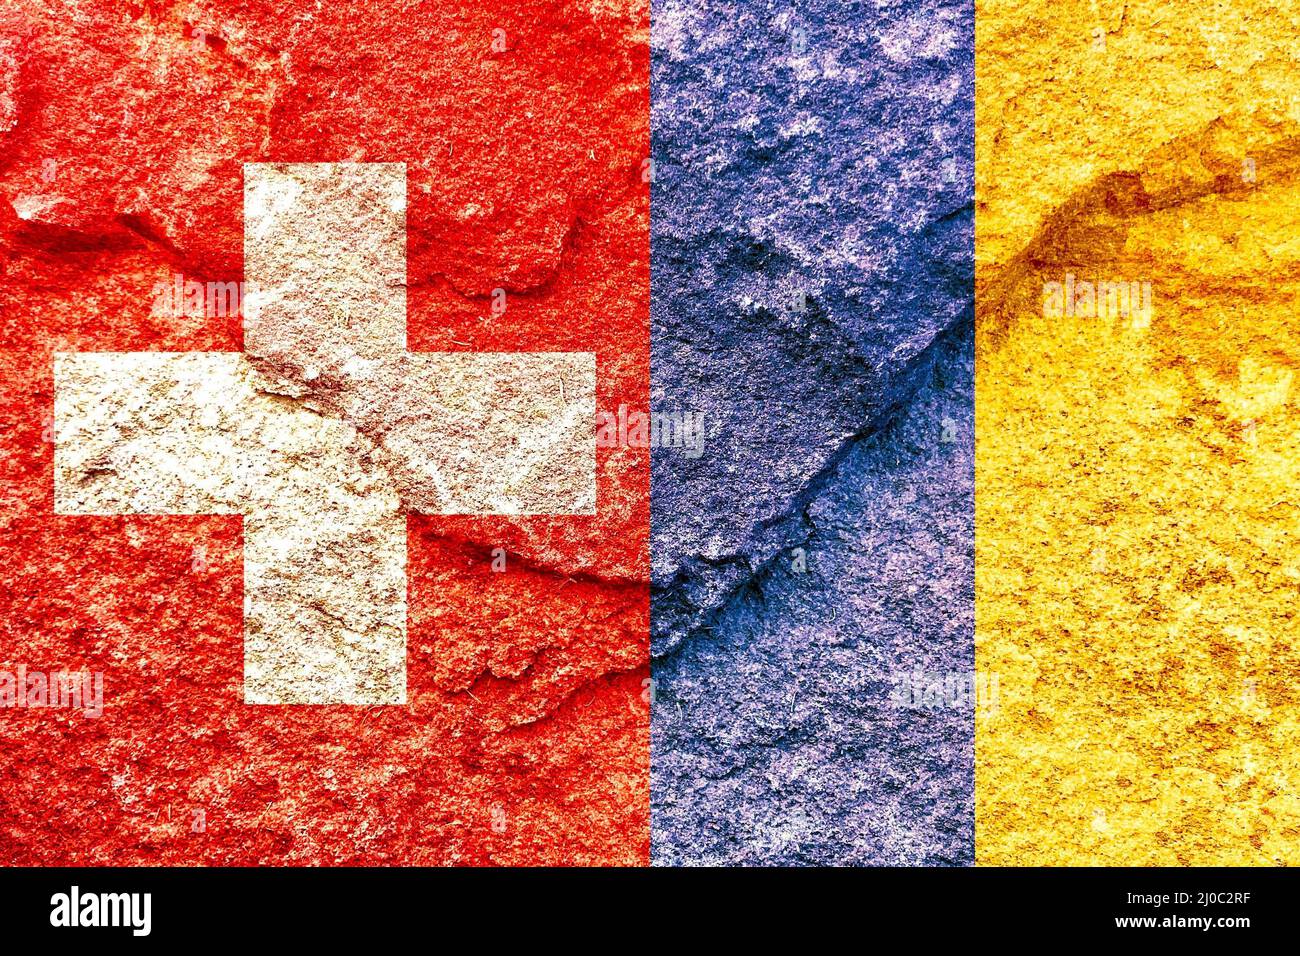 Swiss and Ukraine vertical flags isolated together on weathered stone wall Stock Photo